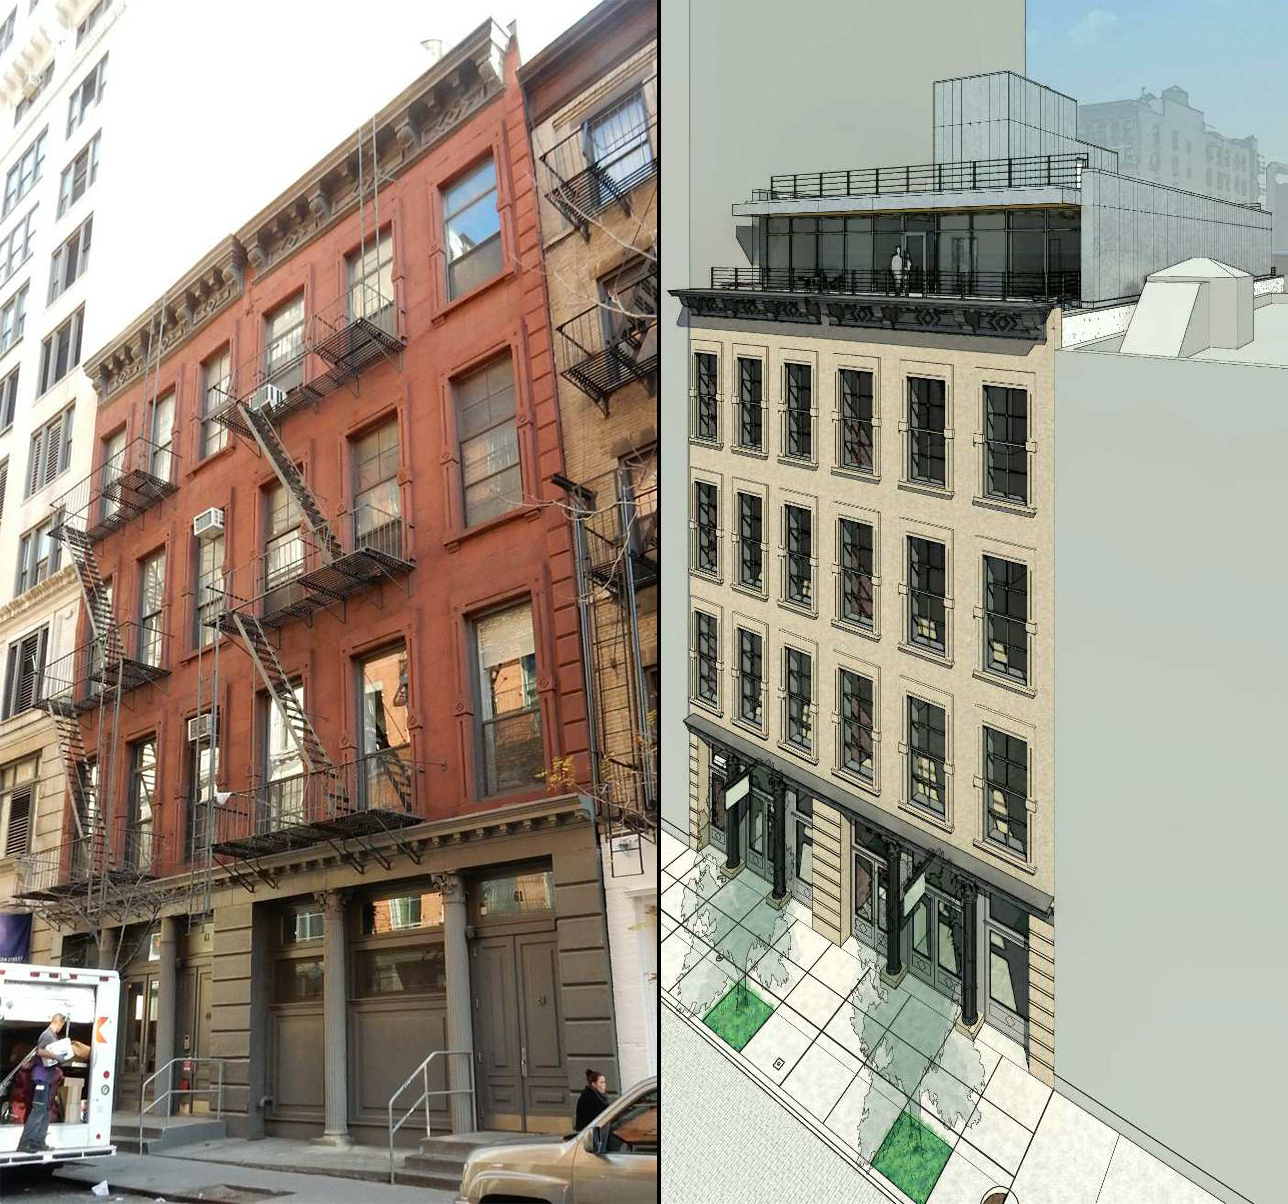 61-63 Crosby Street, existing and proposed